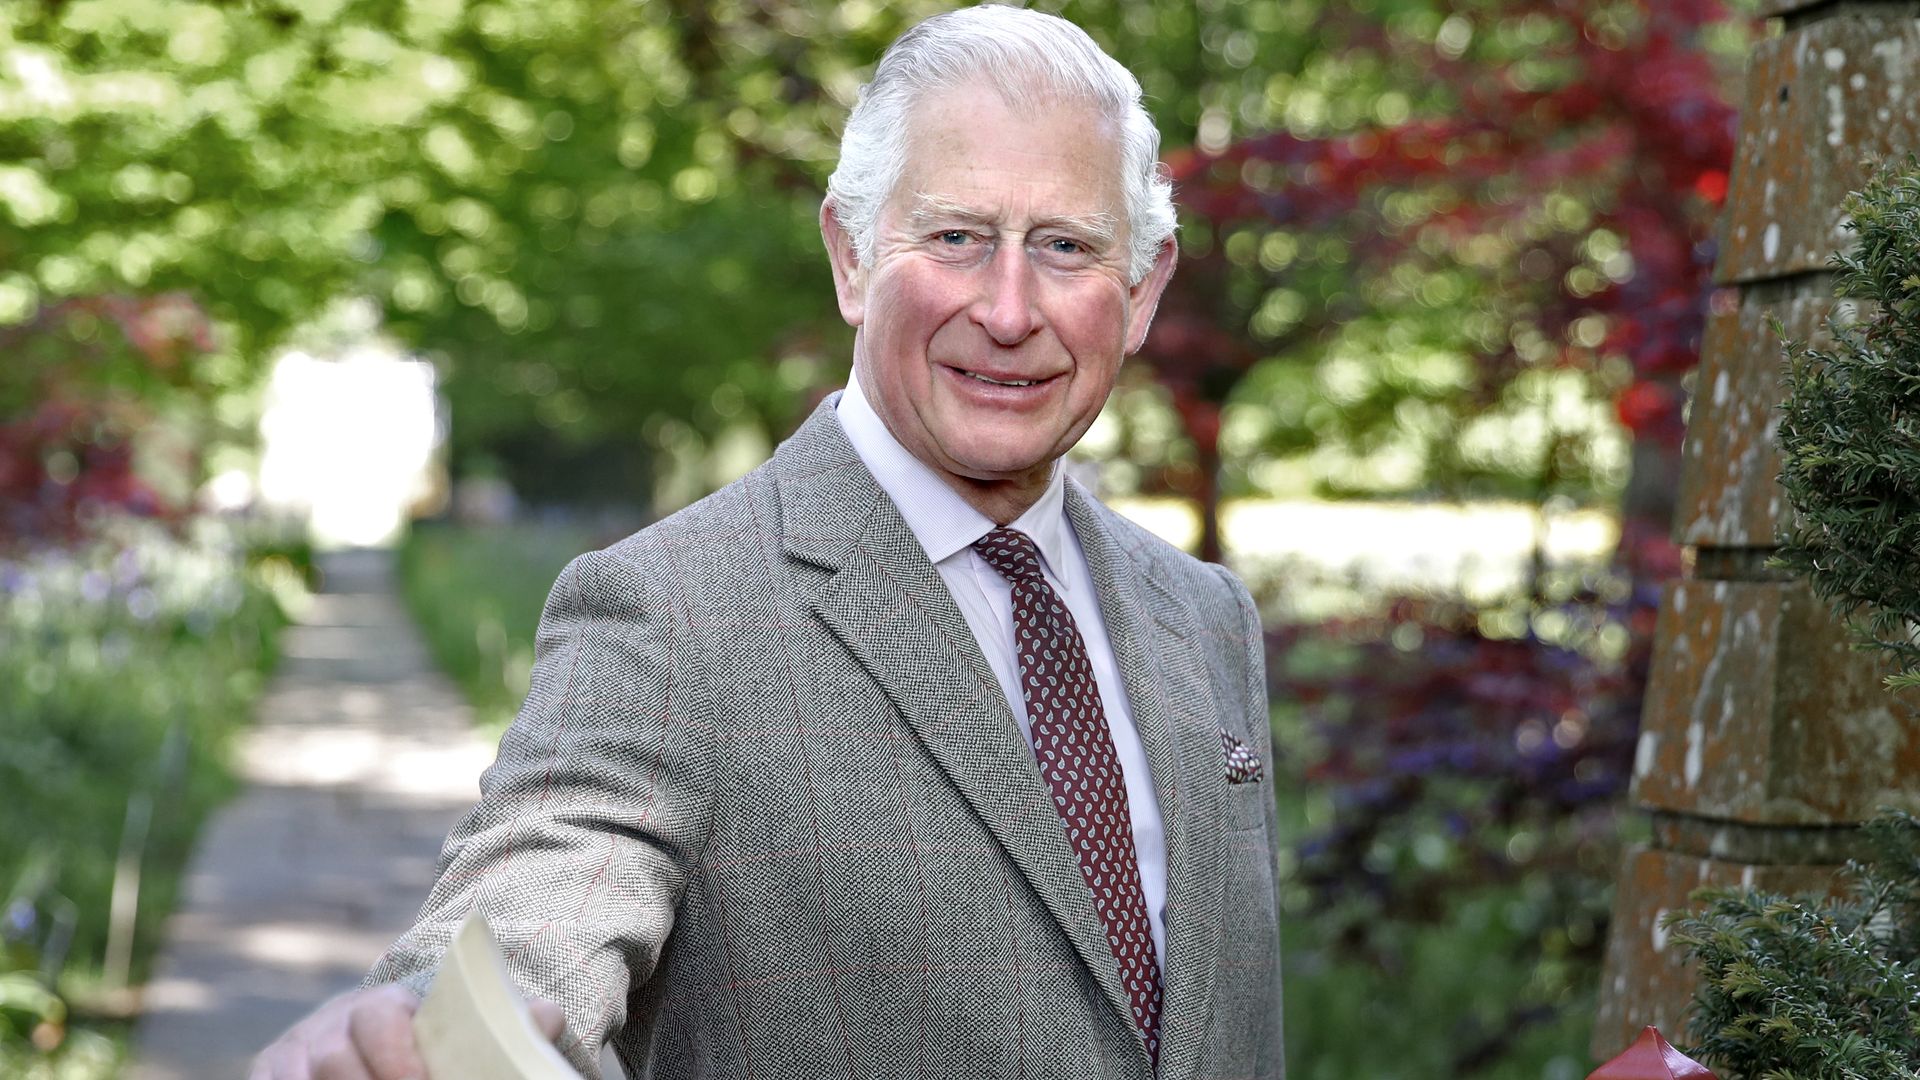 Prince Charles, Prince of Wales poses for a photo at Highgrove House on May 13, 2019 in Tetbury, England